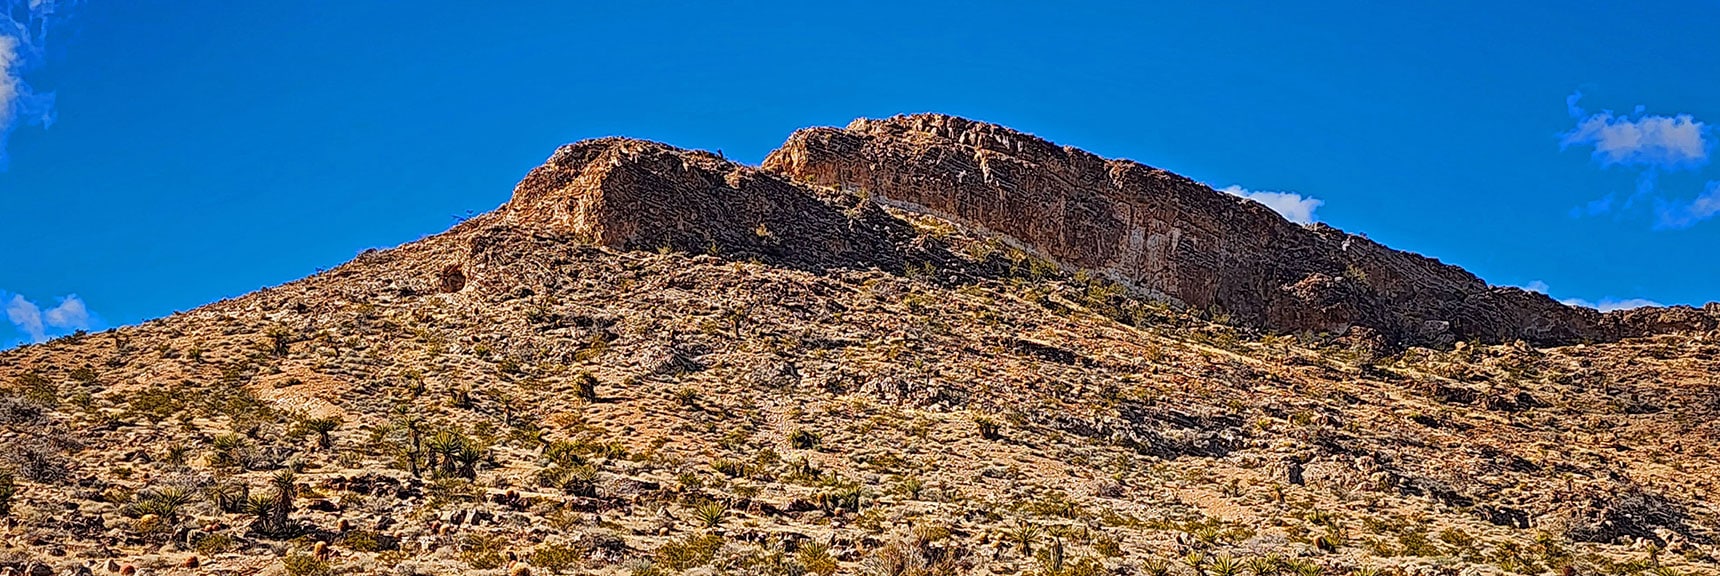 Circling Peak 3844 on the Half Wilson Trail | Calico Basin Daily Workout Trails | Calico Basin, Nevada